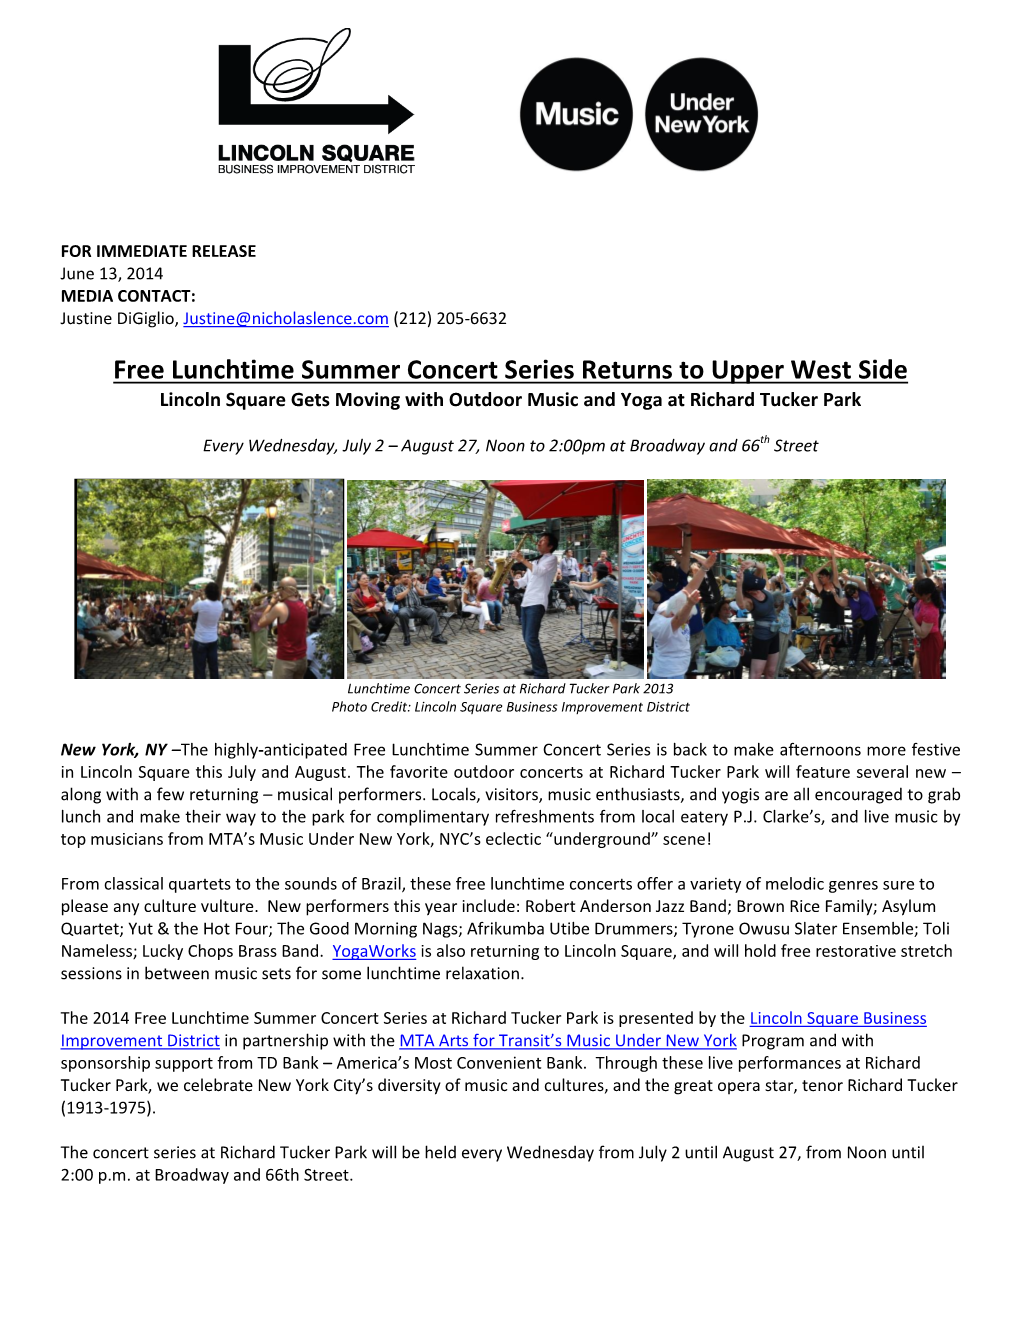 Free Lunchtime Summer Concert Series Returns to Upper West Side Lincoln Square Gets Moving with Outdoor Music and Yoga at Richard Tucker Park